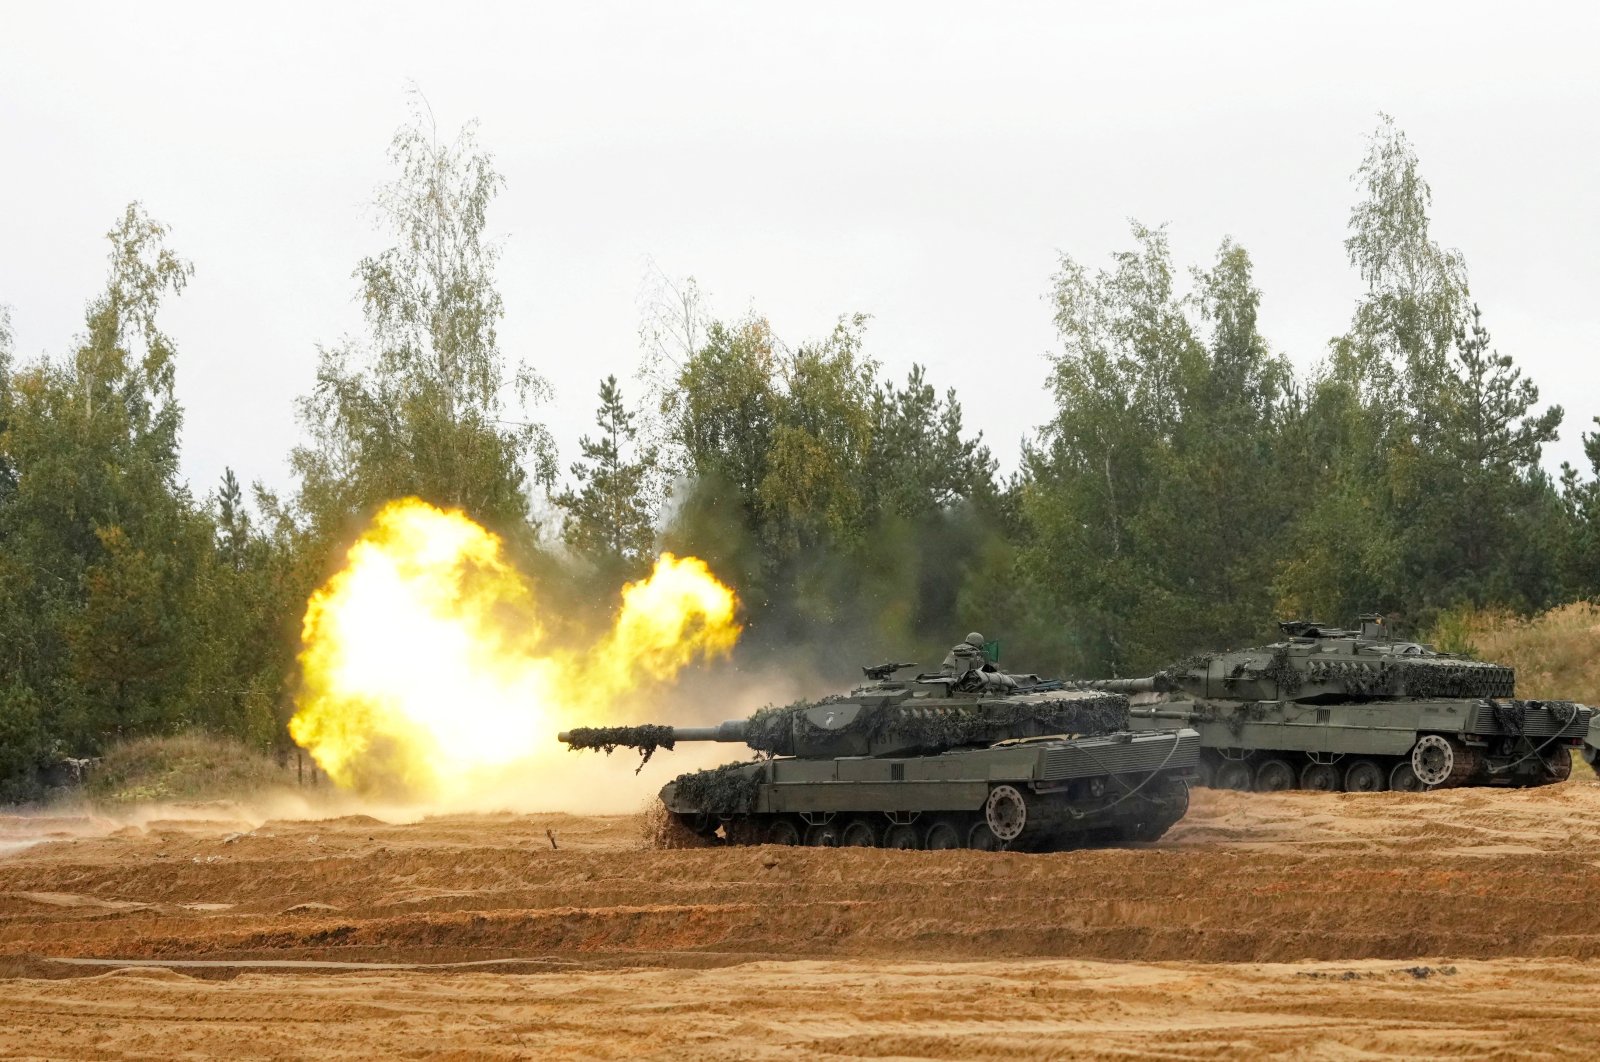 NATO enhanced Forward Presence battle group Spanish army tank Leopard 2 fires during the final phase of the Silver Arrow 2022 military drill on Adazi military training grounds, Latvia, Sept. 29, 2022. (Reuters Photo)